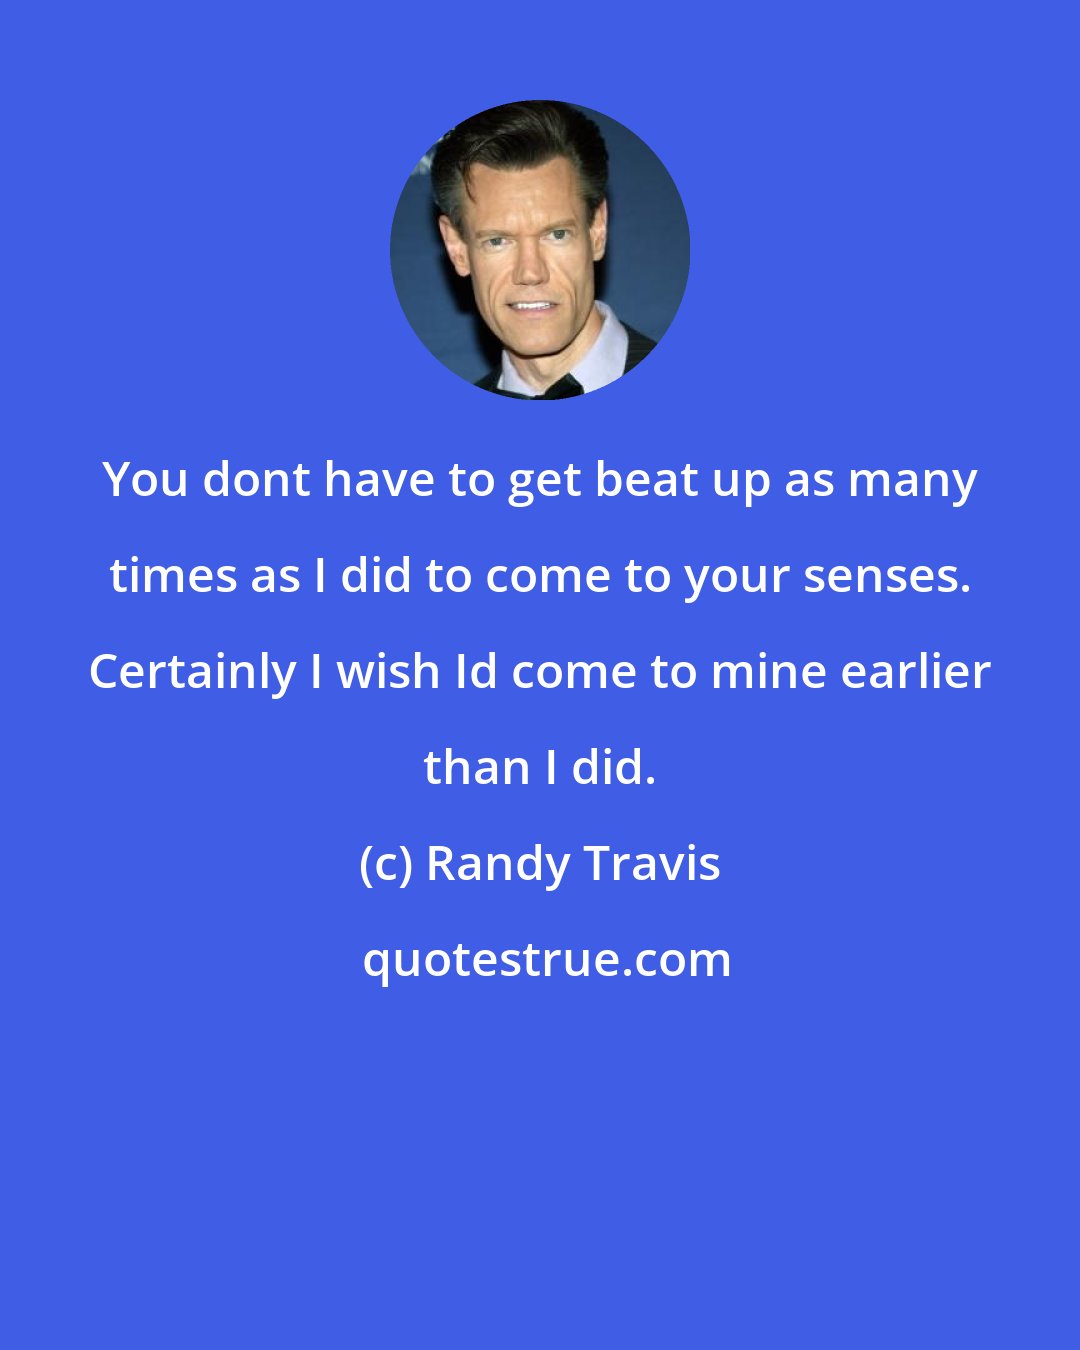 Randy Travis: You dont have to get beat up as many times as I did to come to your senses. Certainly I wish Id come to mine earlier than I did.